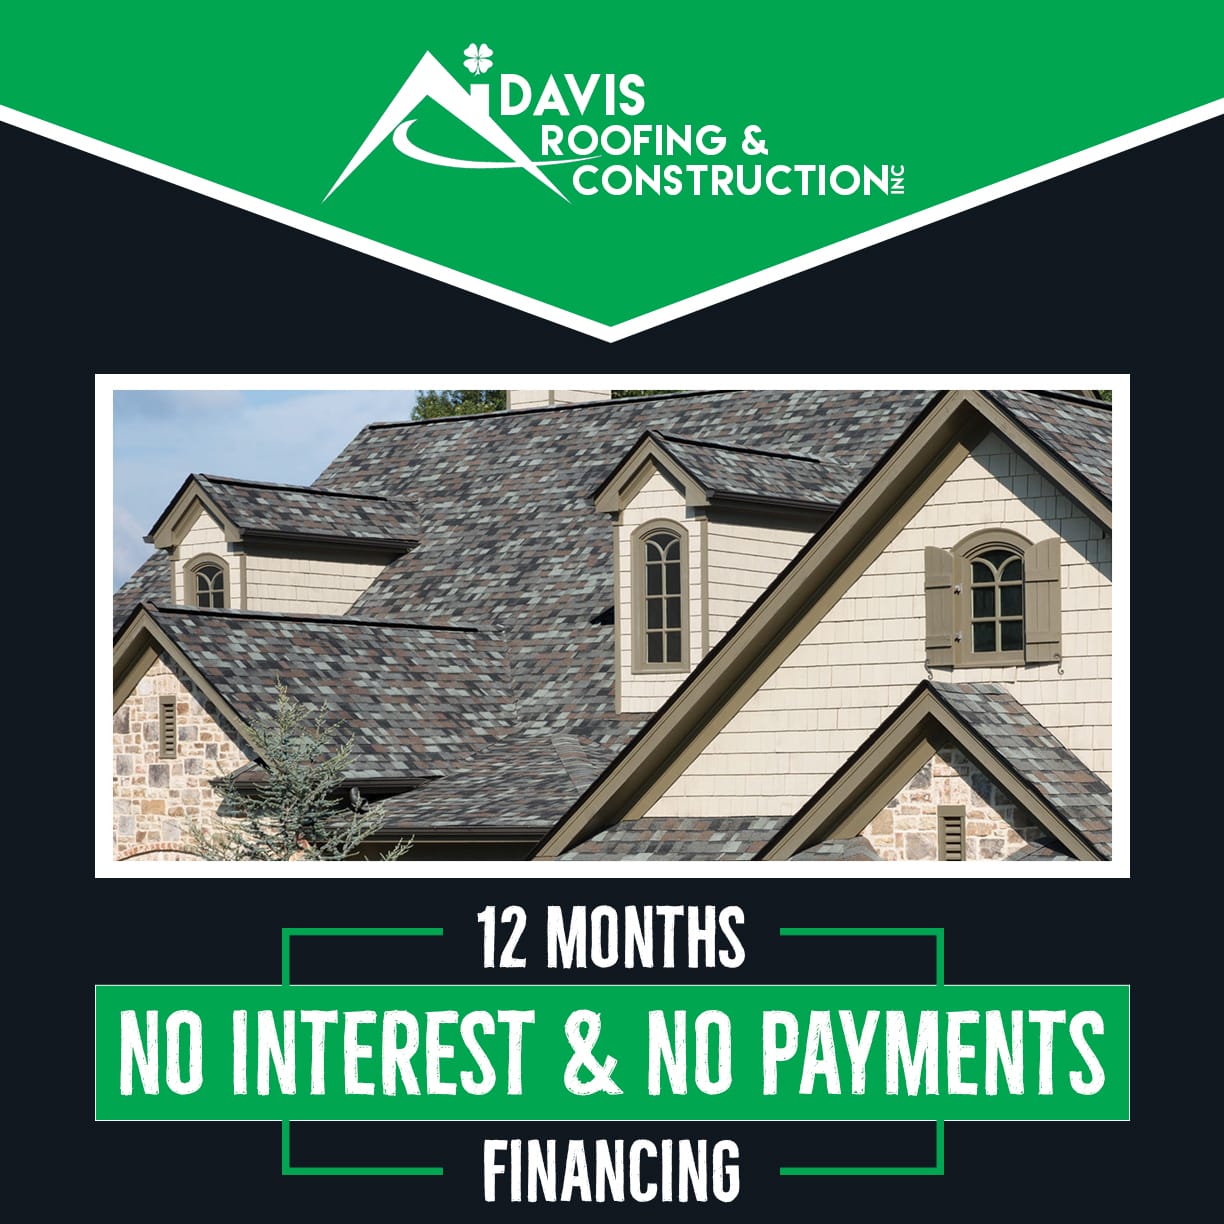 interest free financing for roofing projects available with Davis Roofing and Construction